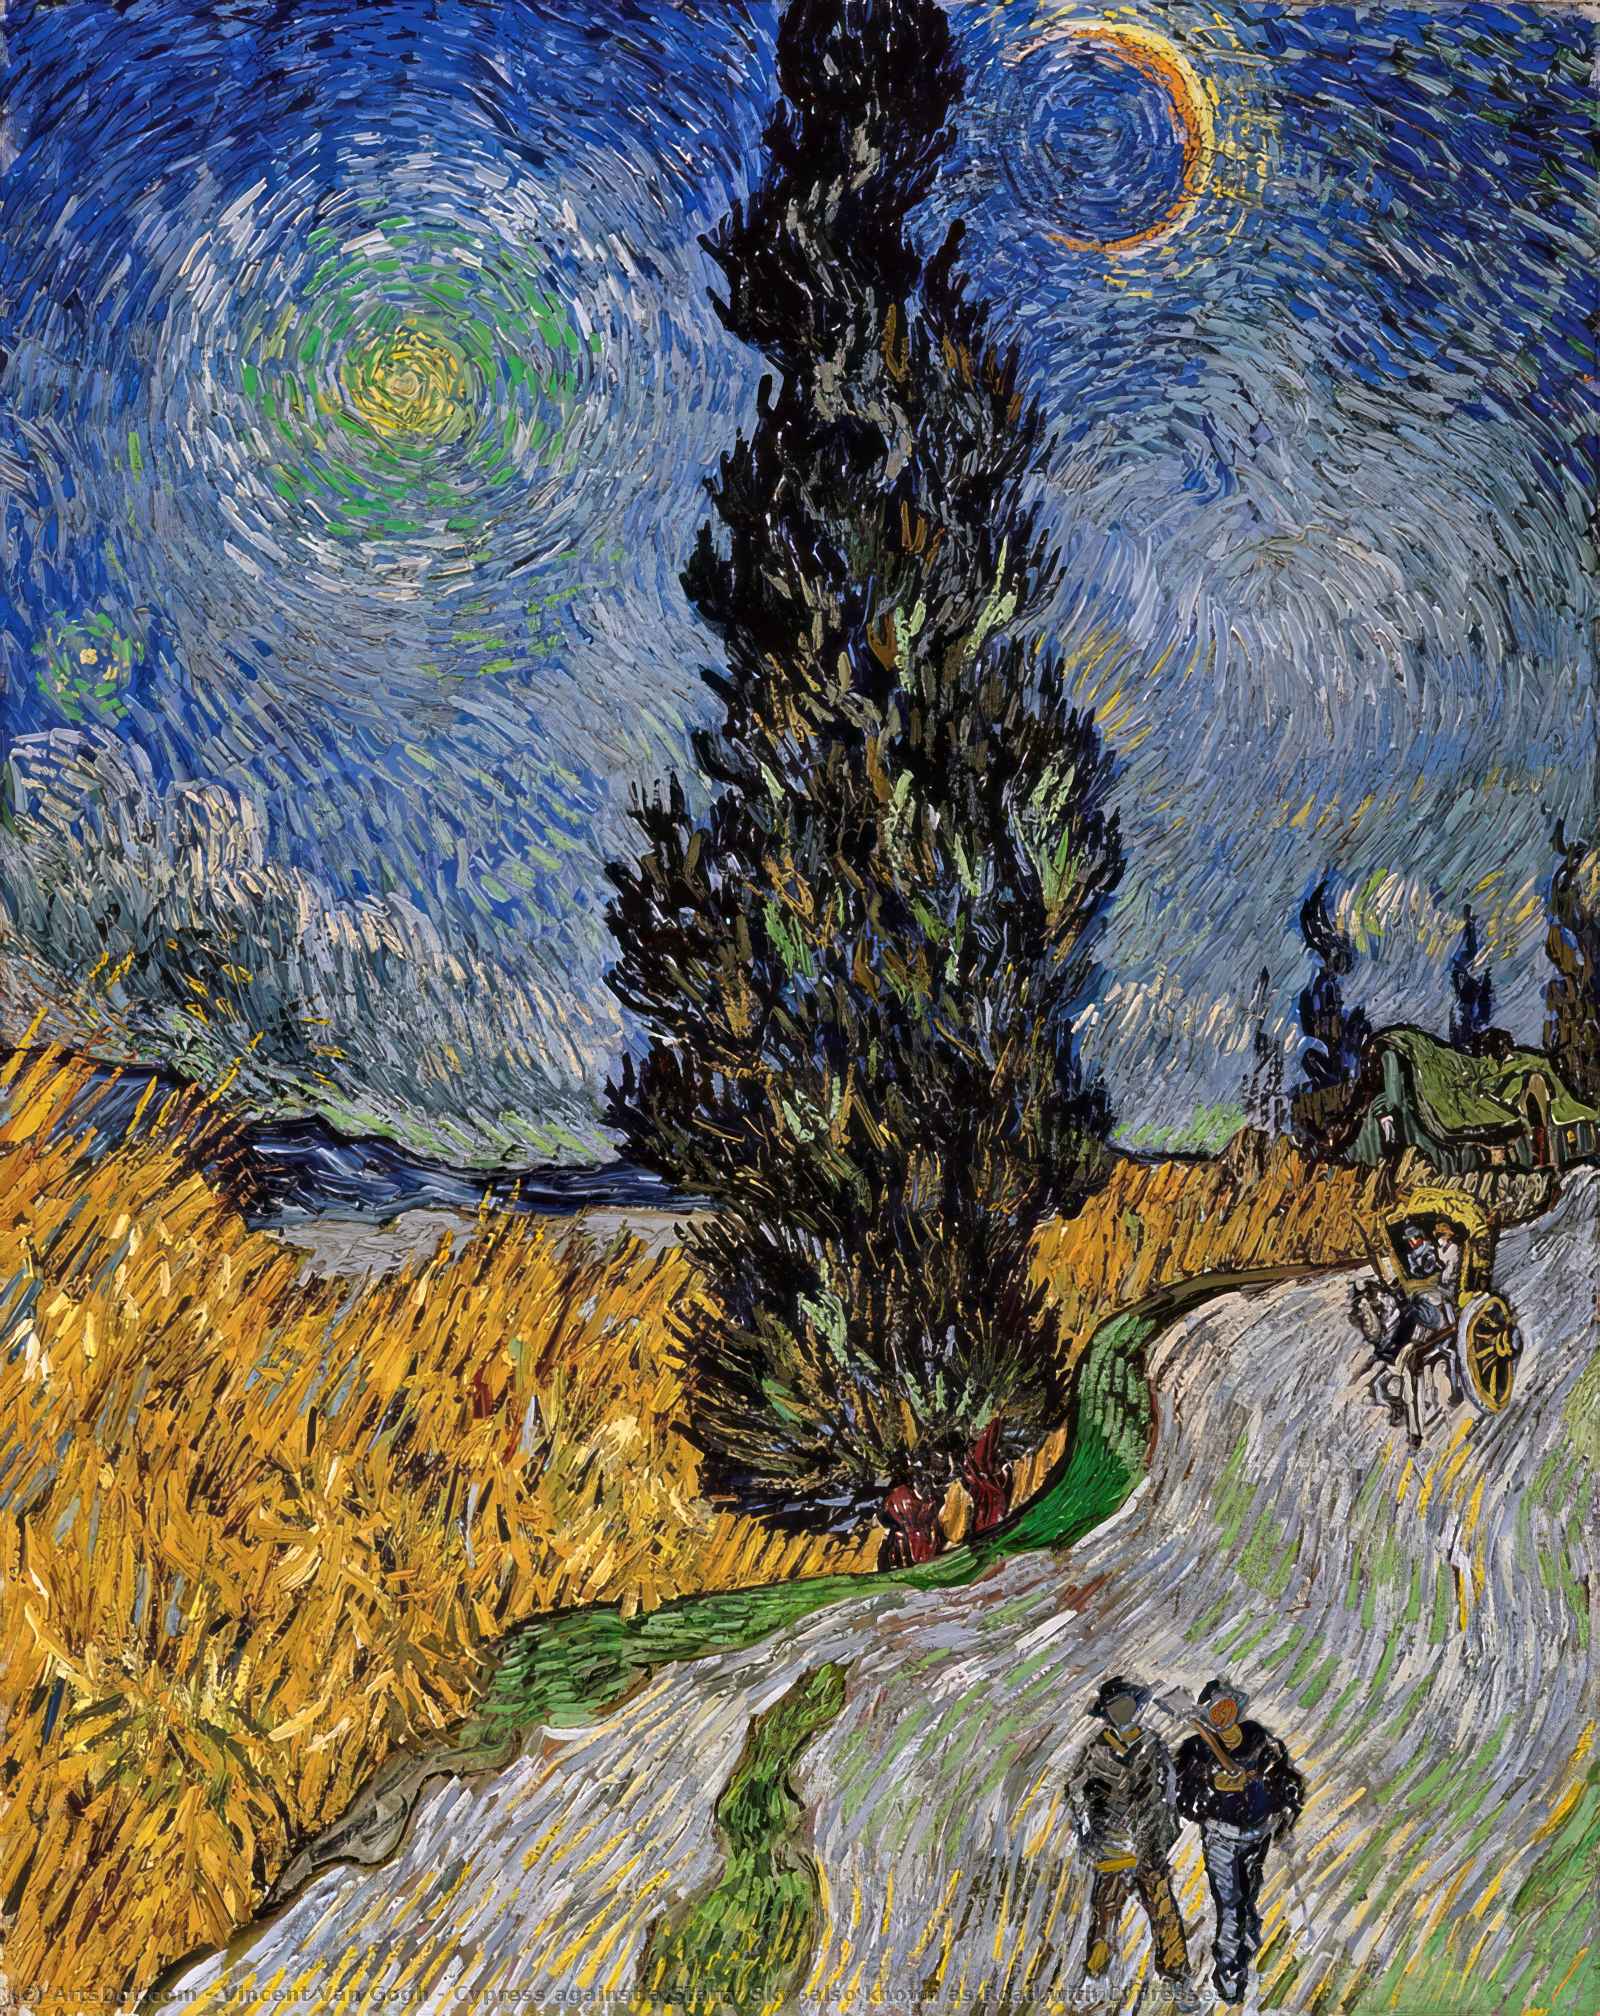 WikiOO.org - Encyclopedia of Fine Arts - Malba, Artwork Vincent Van Gogh - Cypress against a Starry Sky (also known as Road with Cypresses)